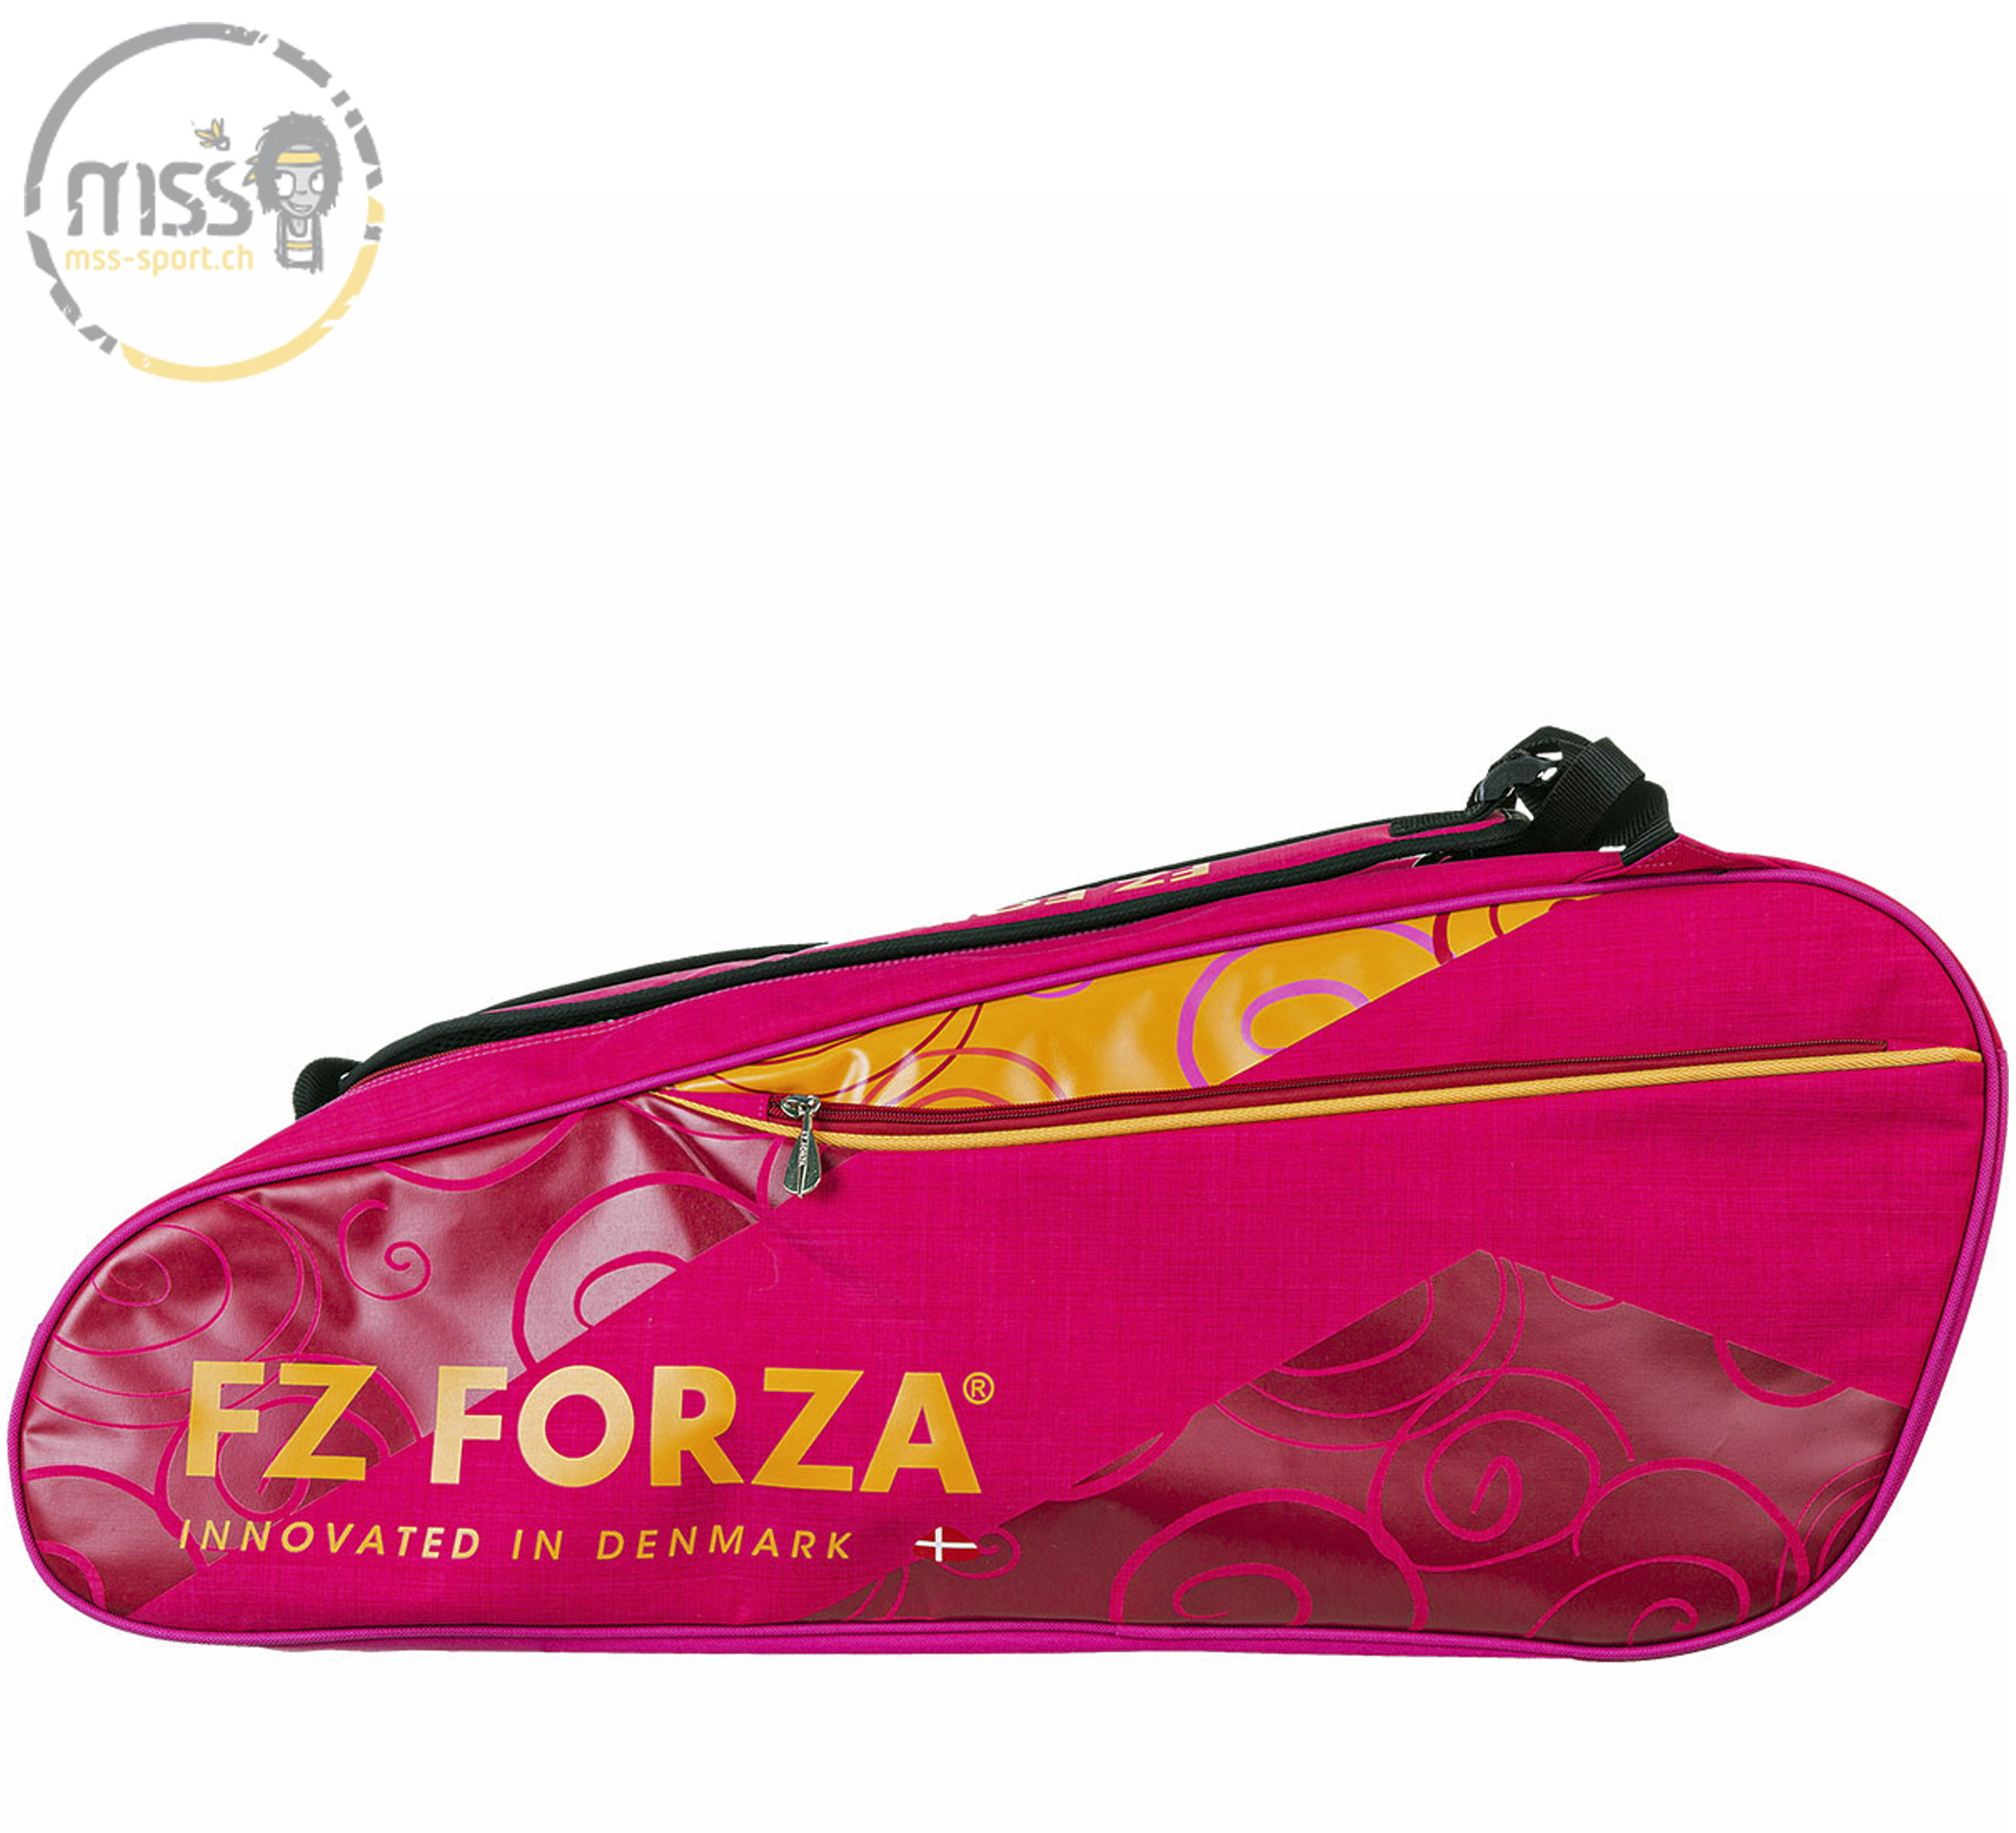 Forza MB Collab X6 Doublebag persian